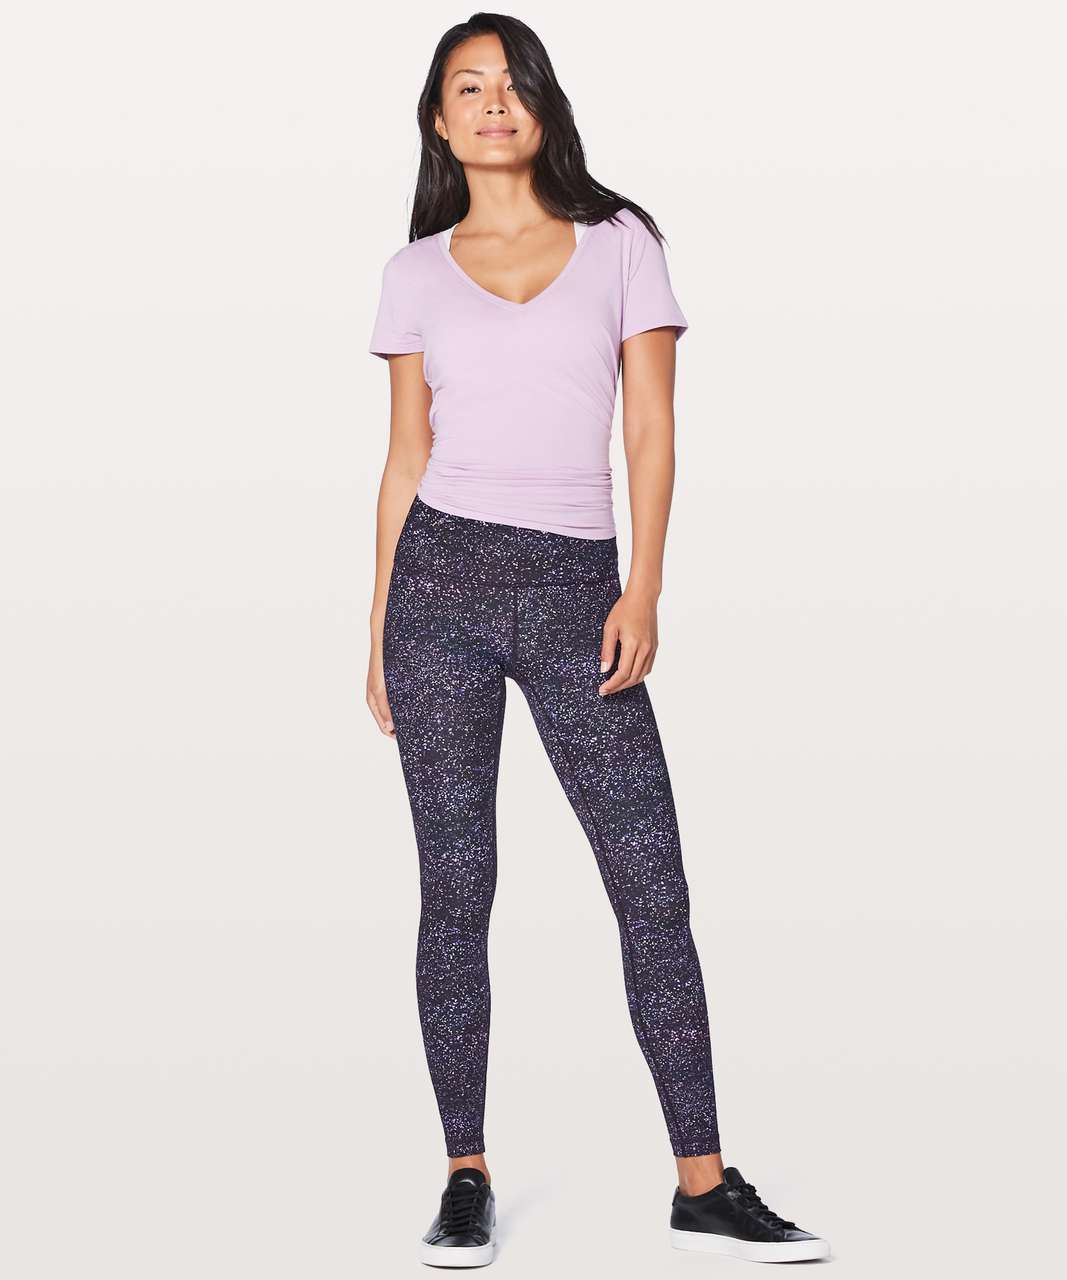 Lululemon Wunder Under High Rise Tight Size 10 - $54 - From Kristy